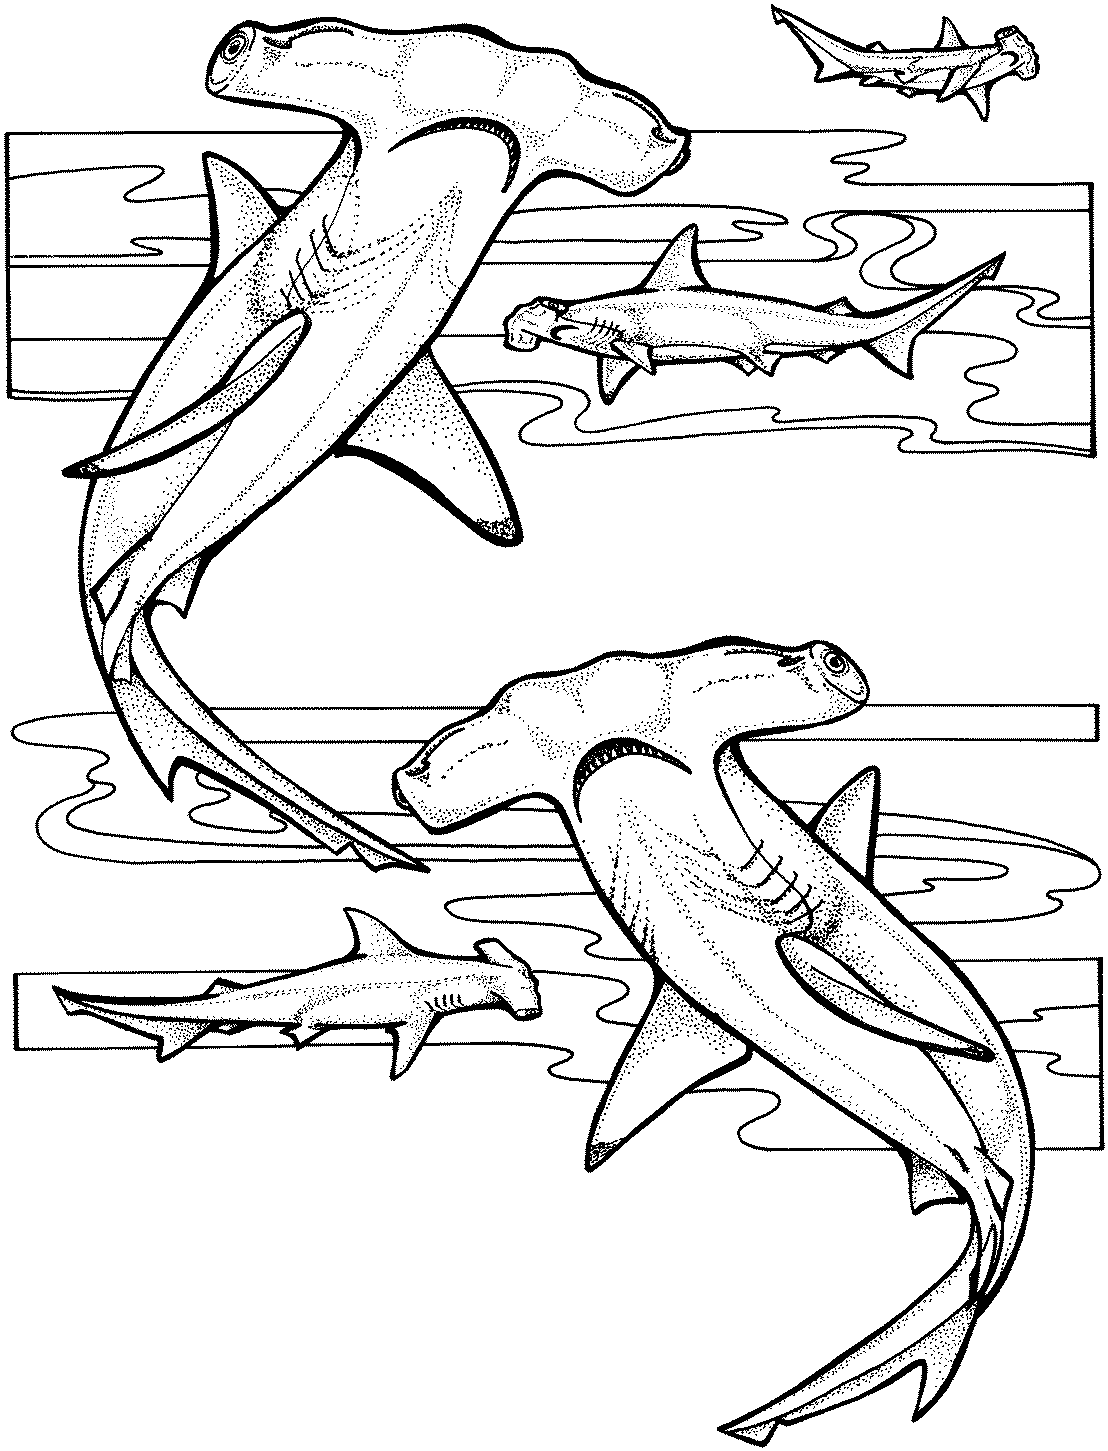 colouring pages of sharks shark coloring pages and posters pages colouring sharks of 